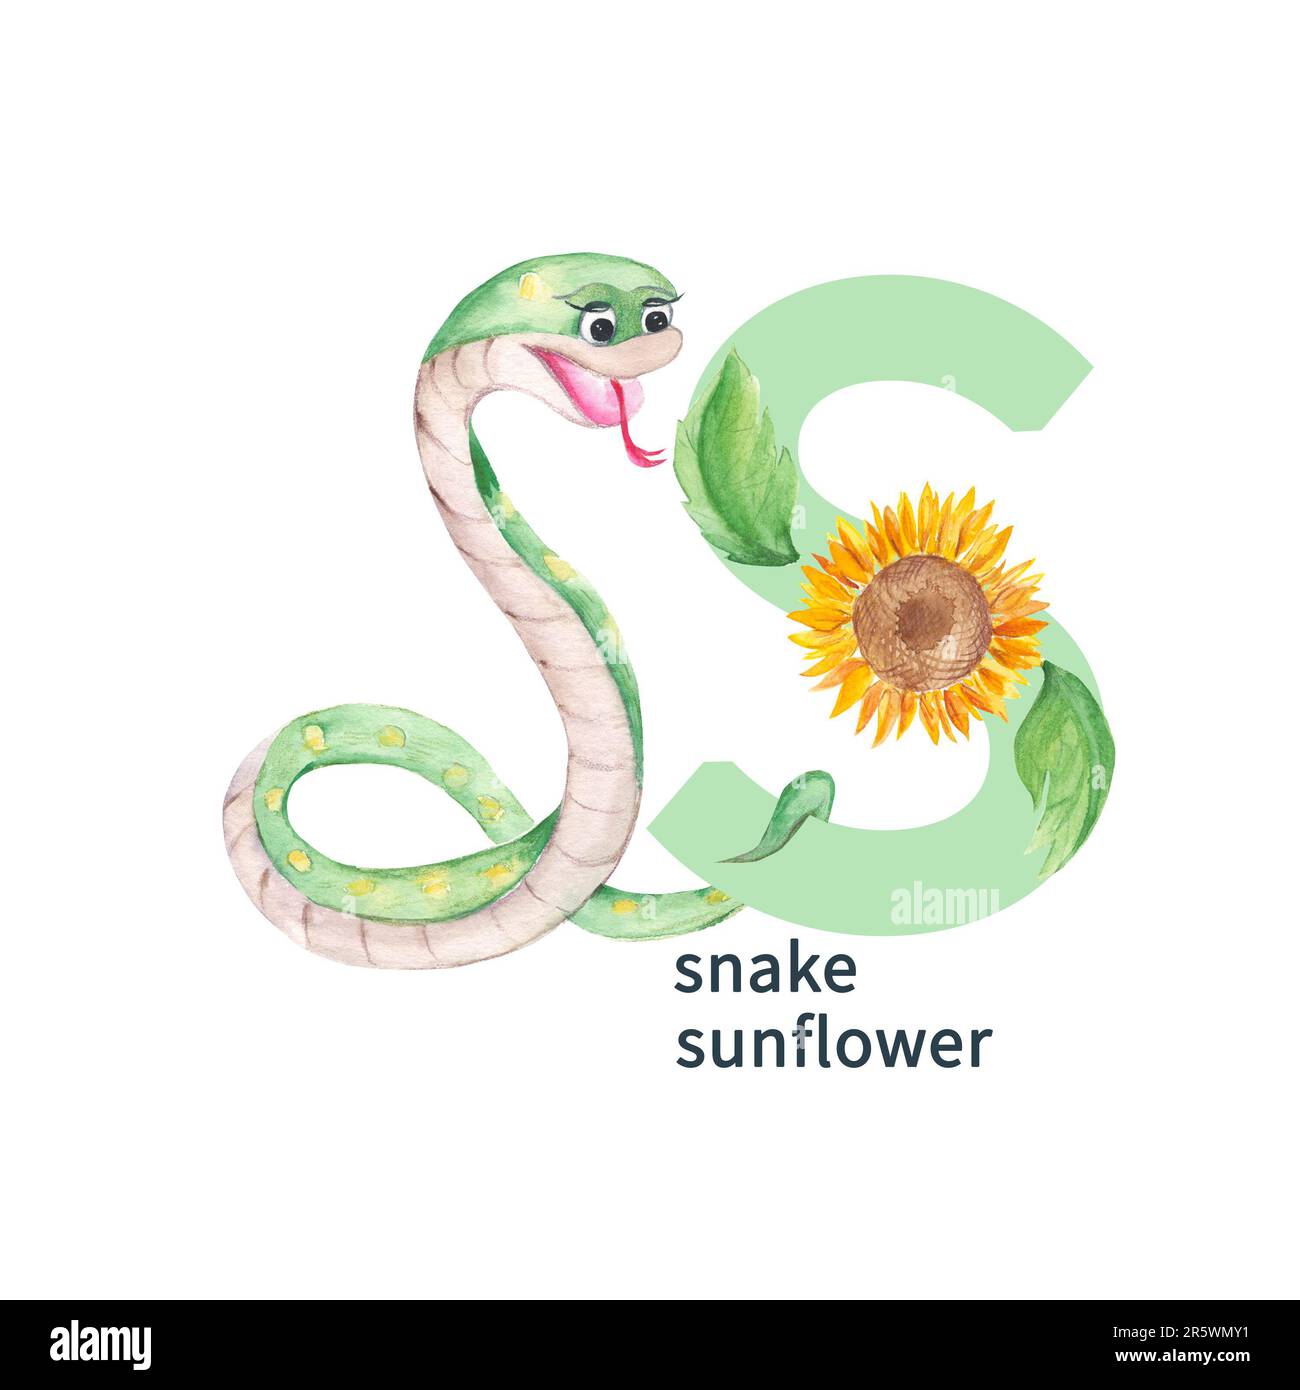 Letter S, snake, sunflower. Cute kids animal and flower ABC alphabet. Watercolor illustration isolated on white background. Can be used for alphabet Stock Photo